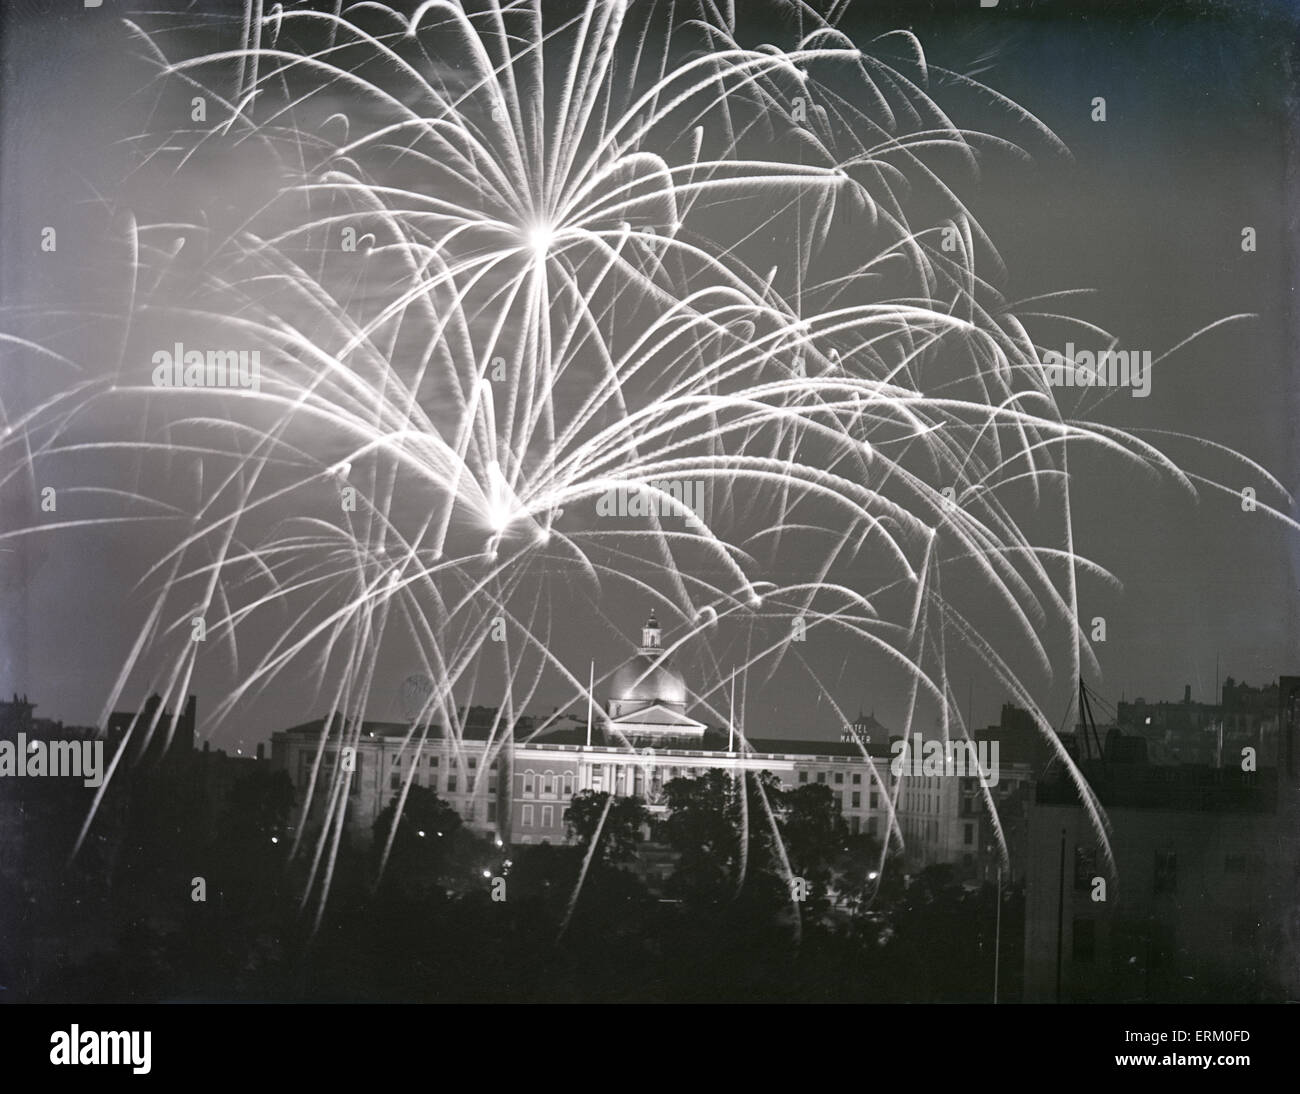 Antique 1930 photograph, July 4th fireworks over the Massachusetts State House in Boston, Massachusetts, USA. The old neon sign for the Hotel Manger is visible in the background. Stock Photo